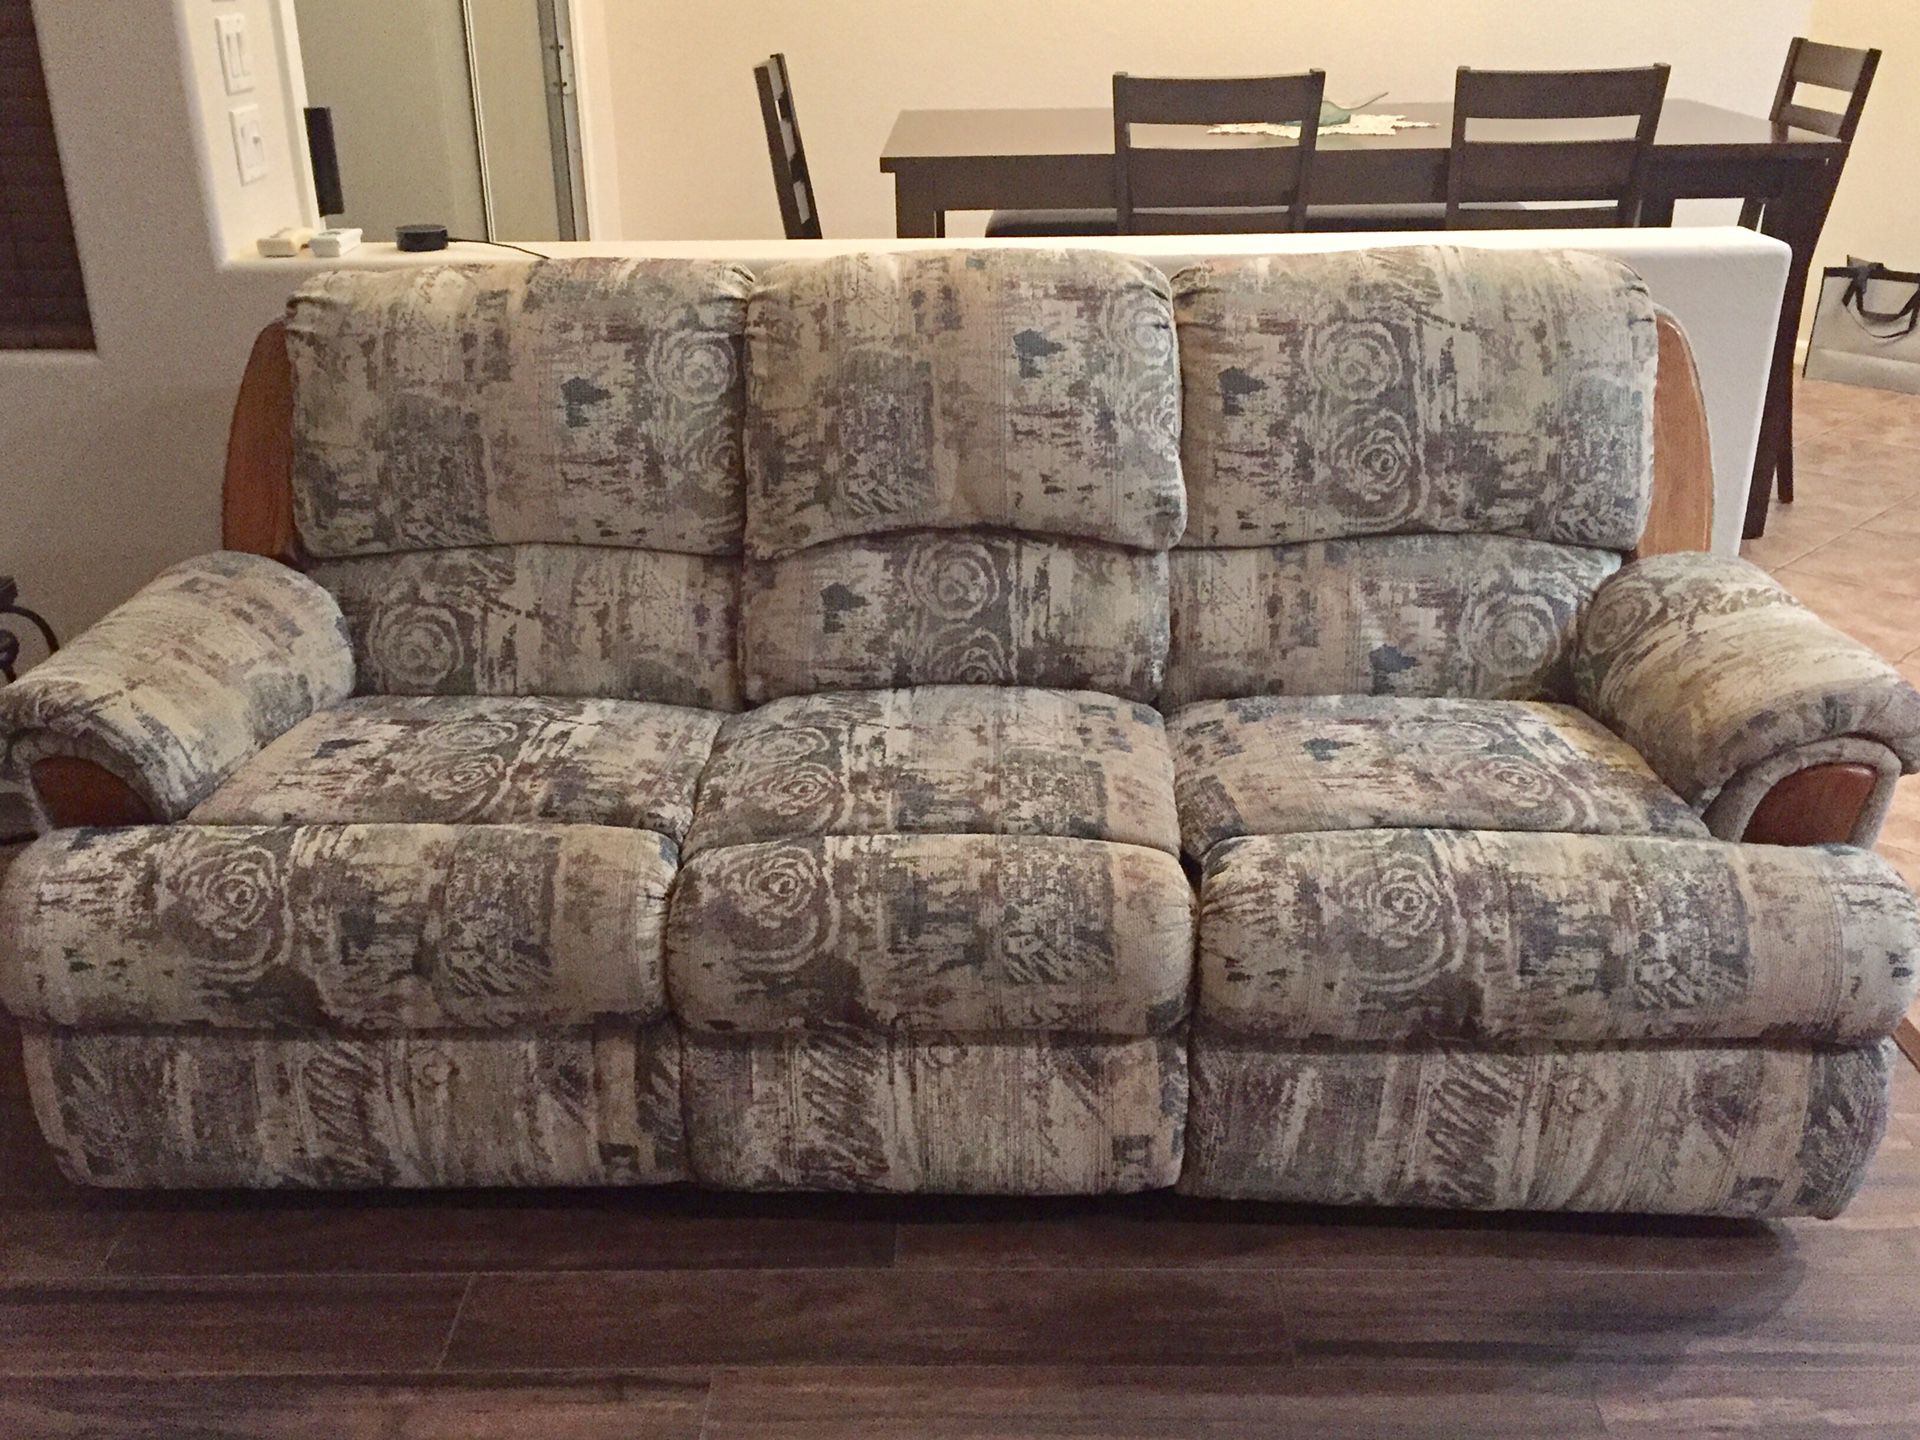 Double reclining sofa - great condition